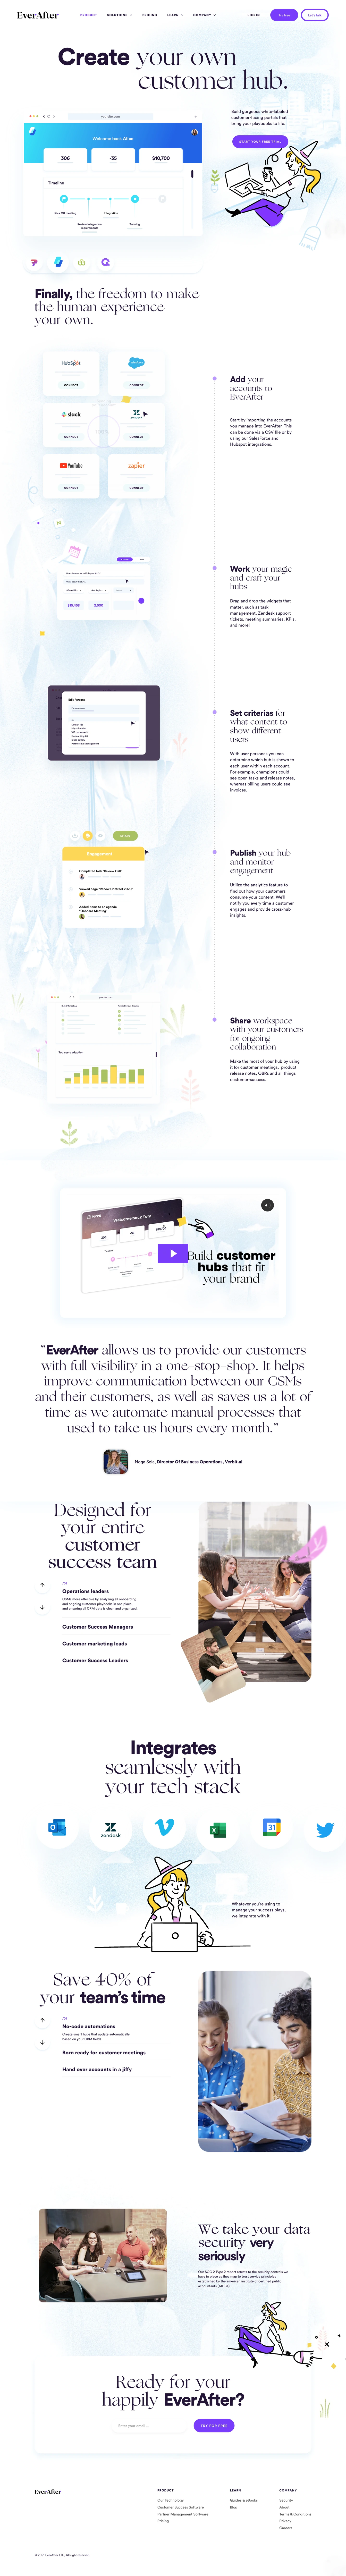 EverAfter Landing Page Example: Get on the same page with your customer. EverAfter lets CSMs build personalized hubs for every user directly inside your product. No code required.